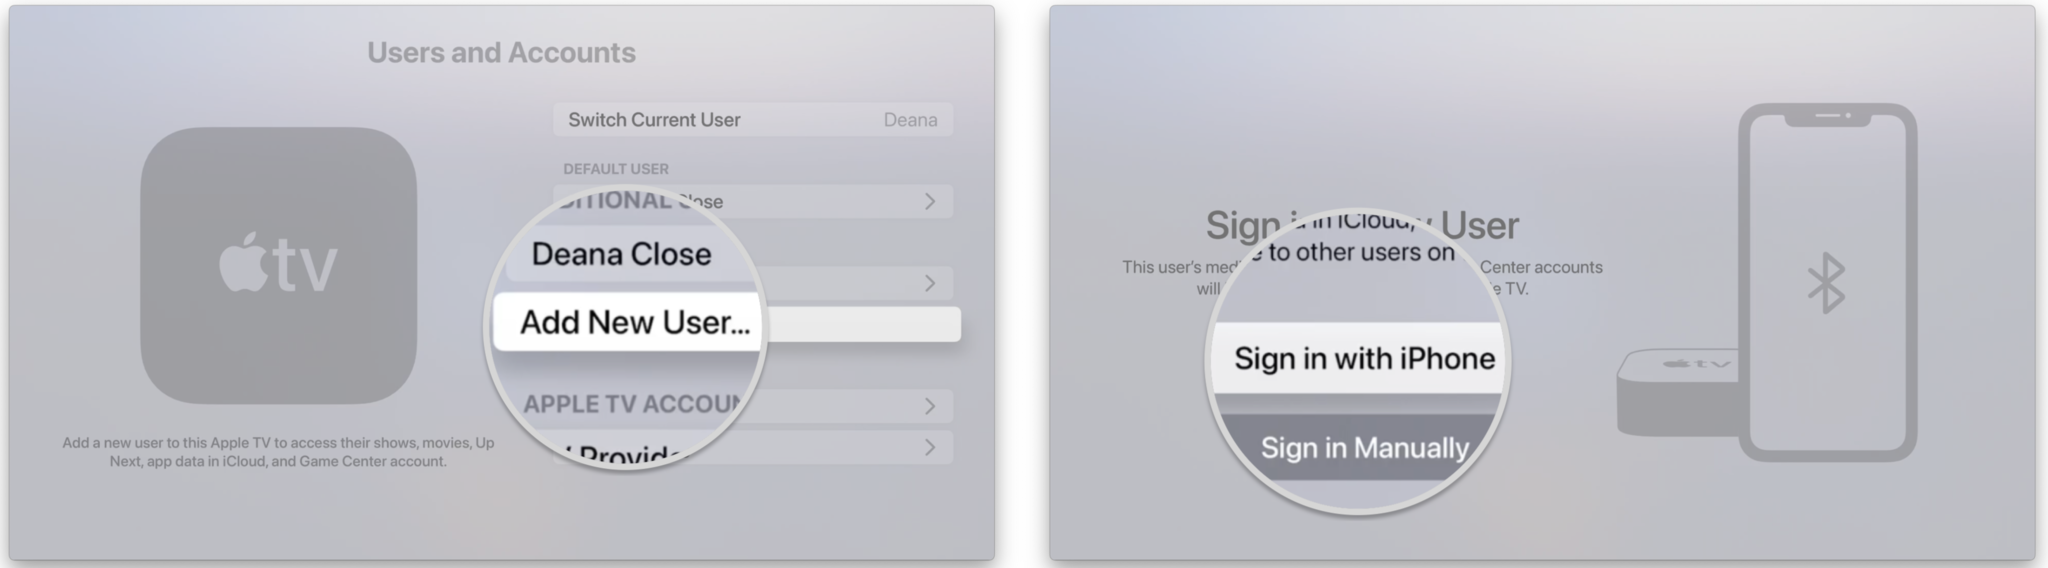 How to add a user on the Apple TV by showing steps: Click Add New User…, Click Sign in with iPhone